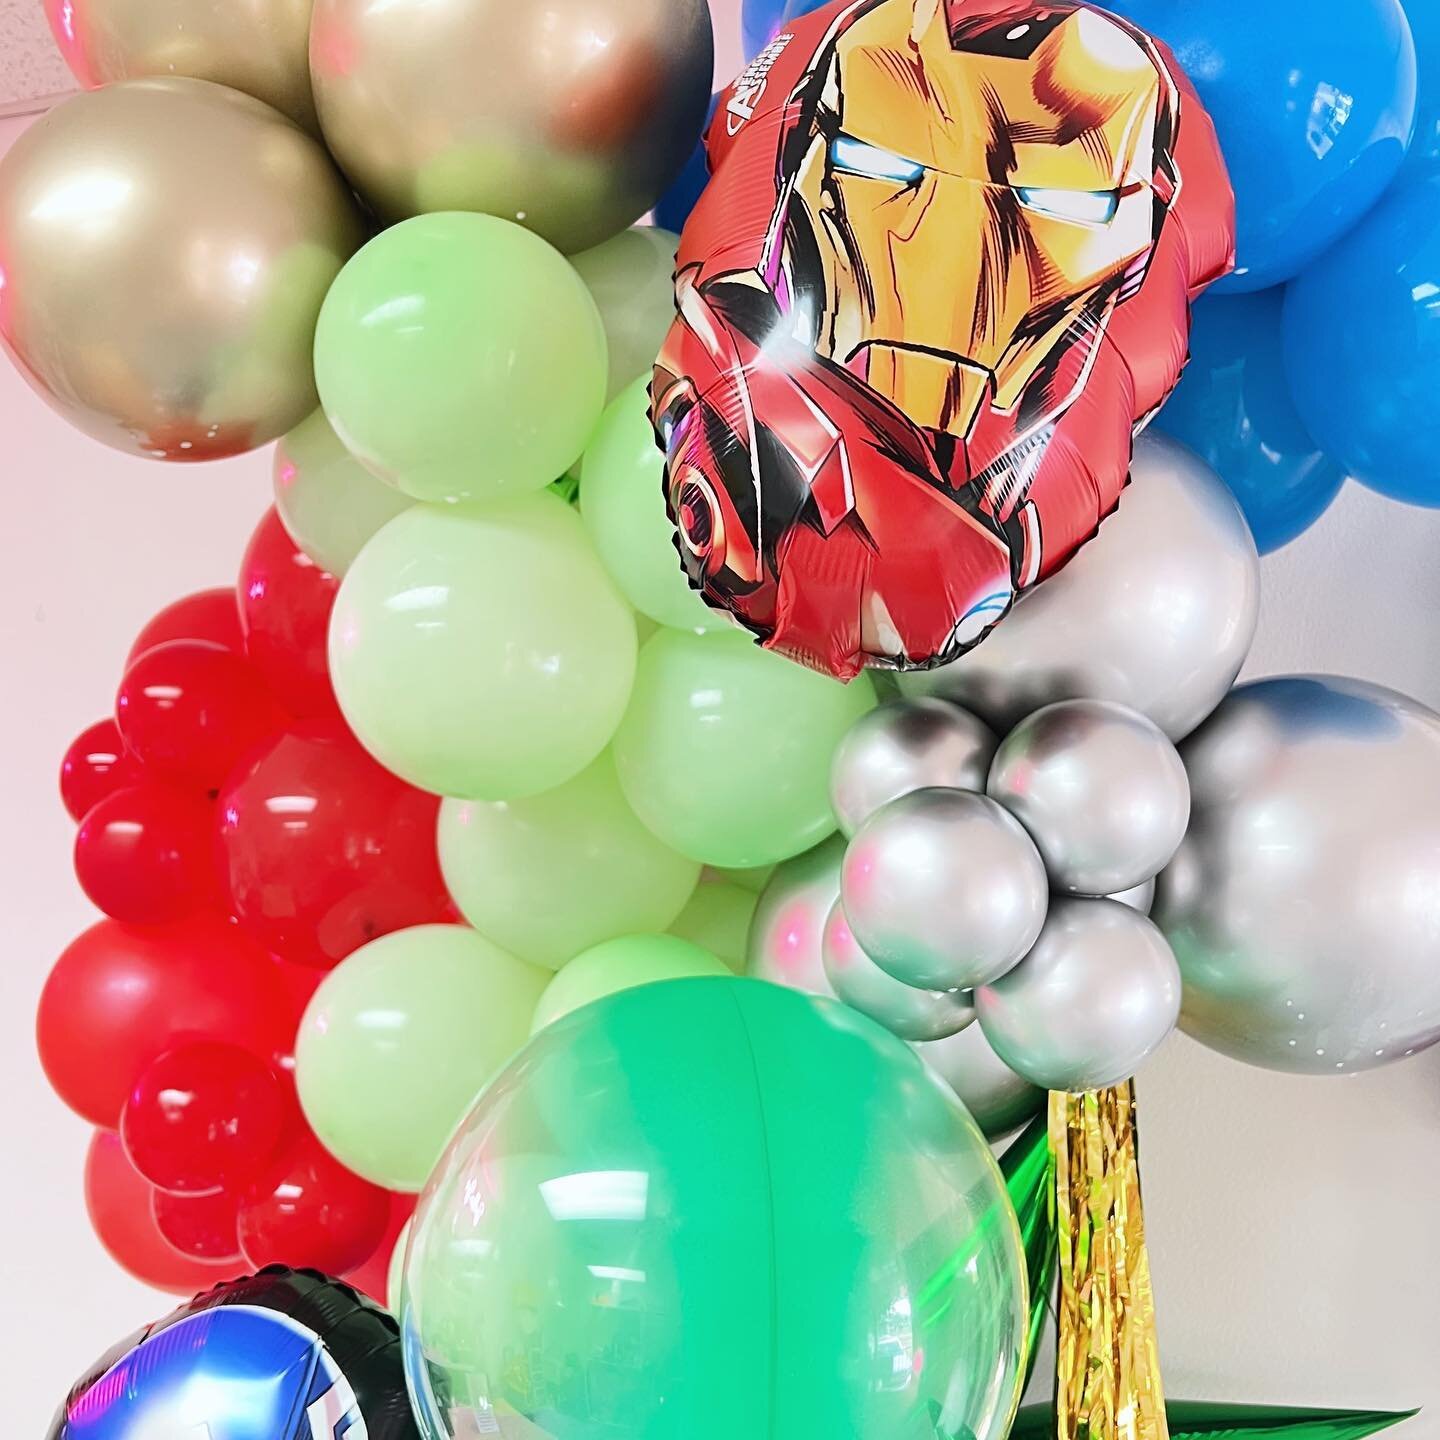 Check out our avengers inspired set up we have at our shop!It been a minute since had a set up&hellip;..Yesterday&rsquo;s set up got me so inspired that I got to the shop early and started blowing up balloons&hellip;.It was nice getting back into the